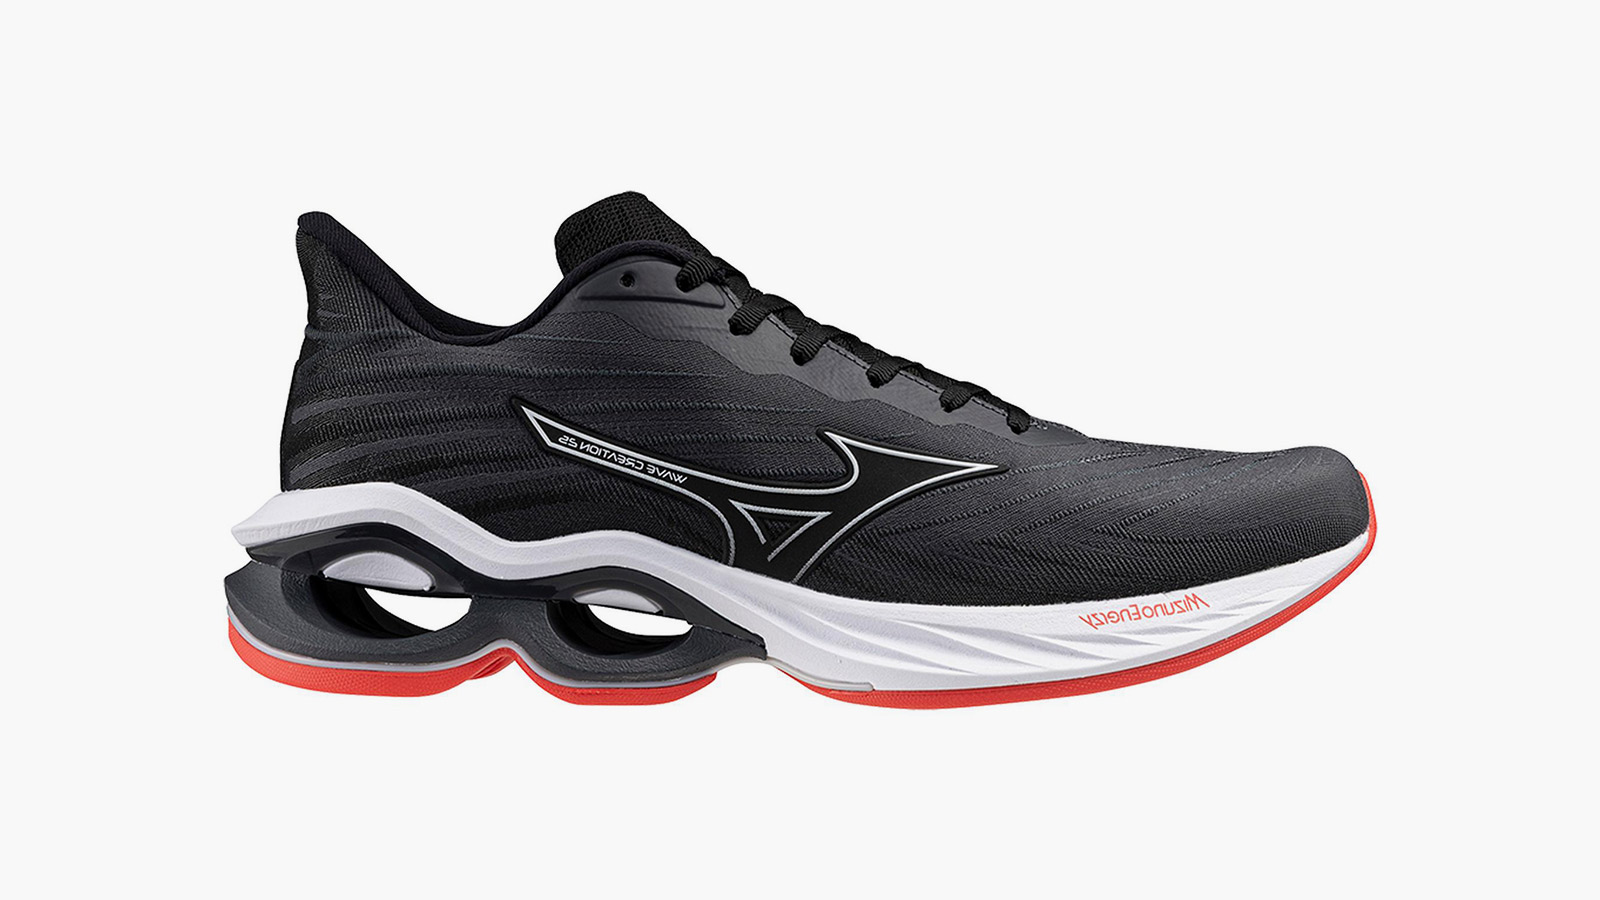 a black men's running shoe with a white and red sole